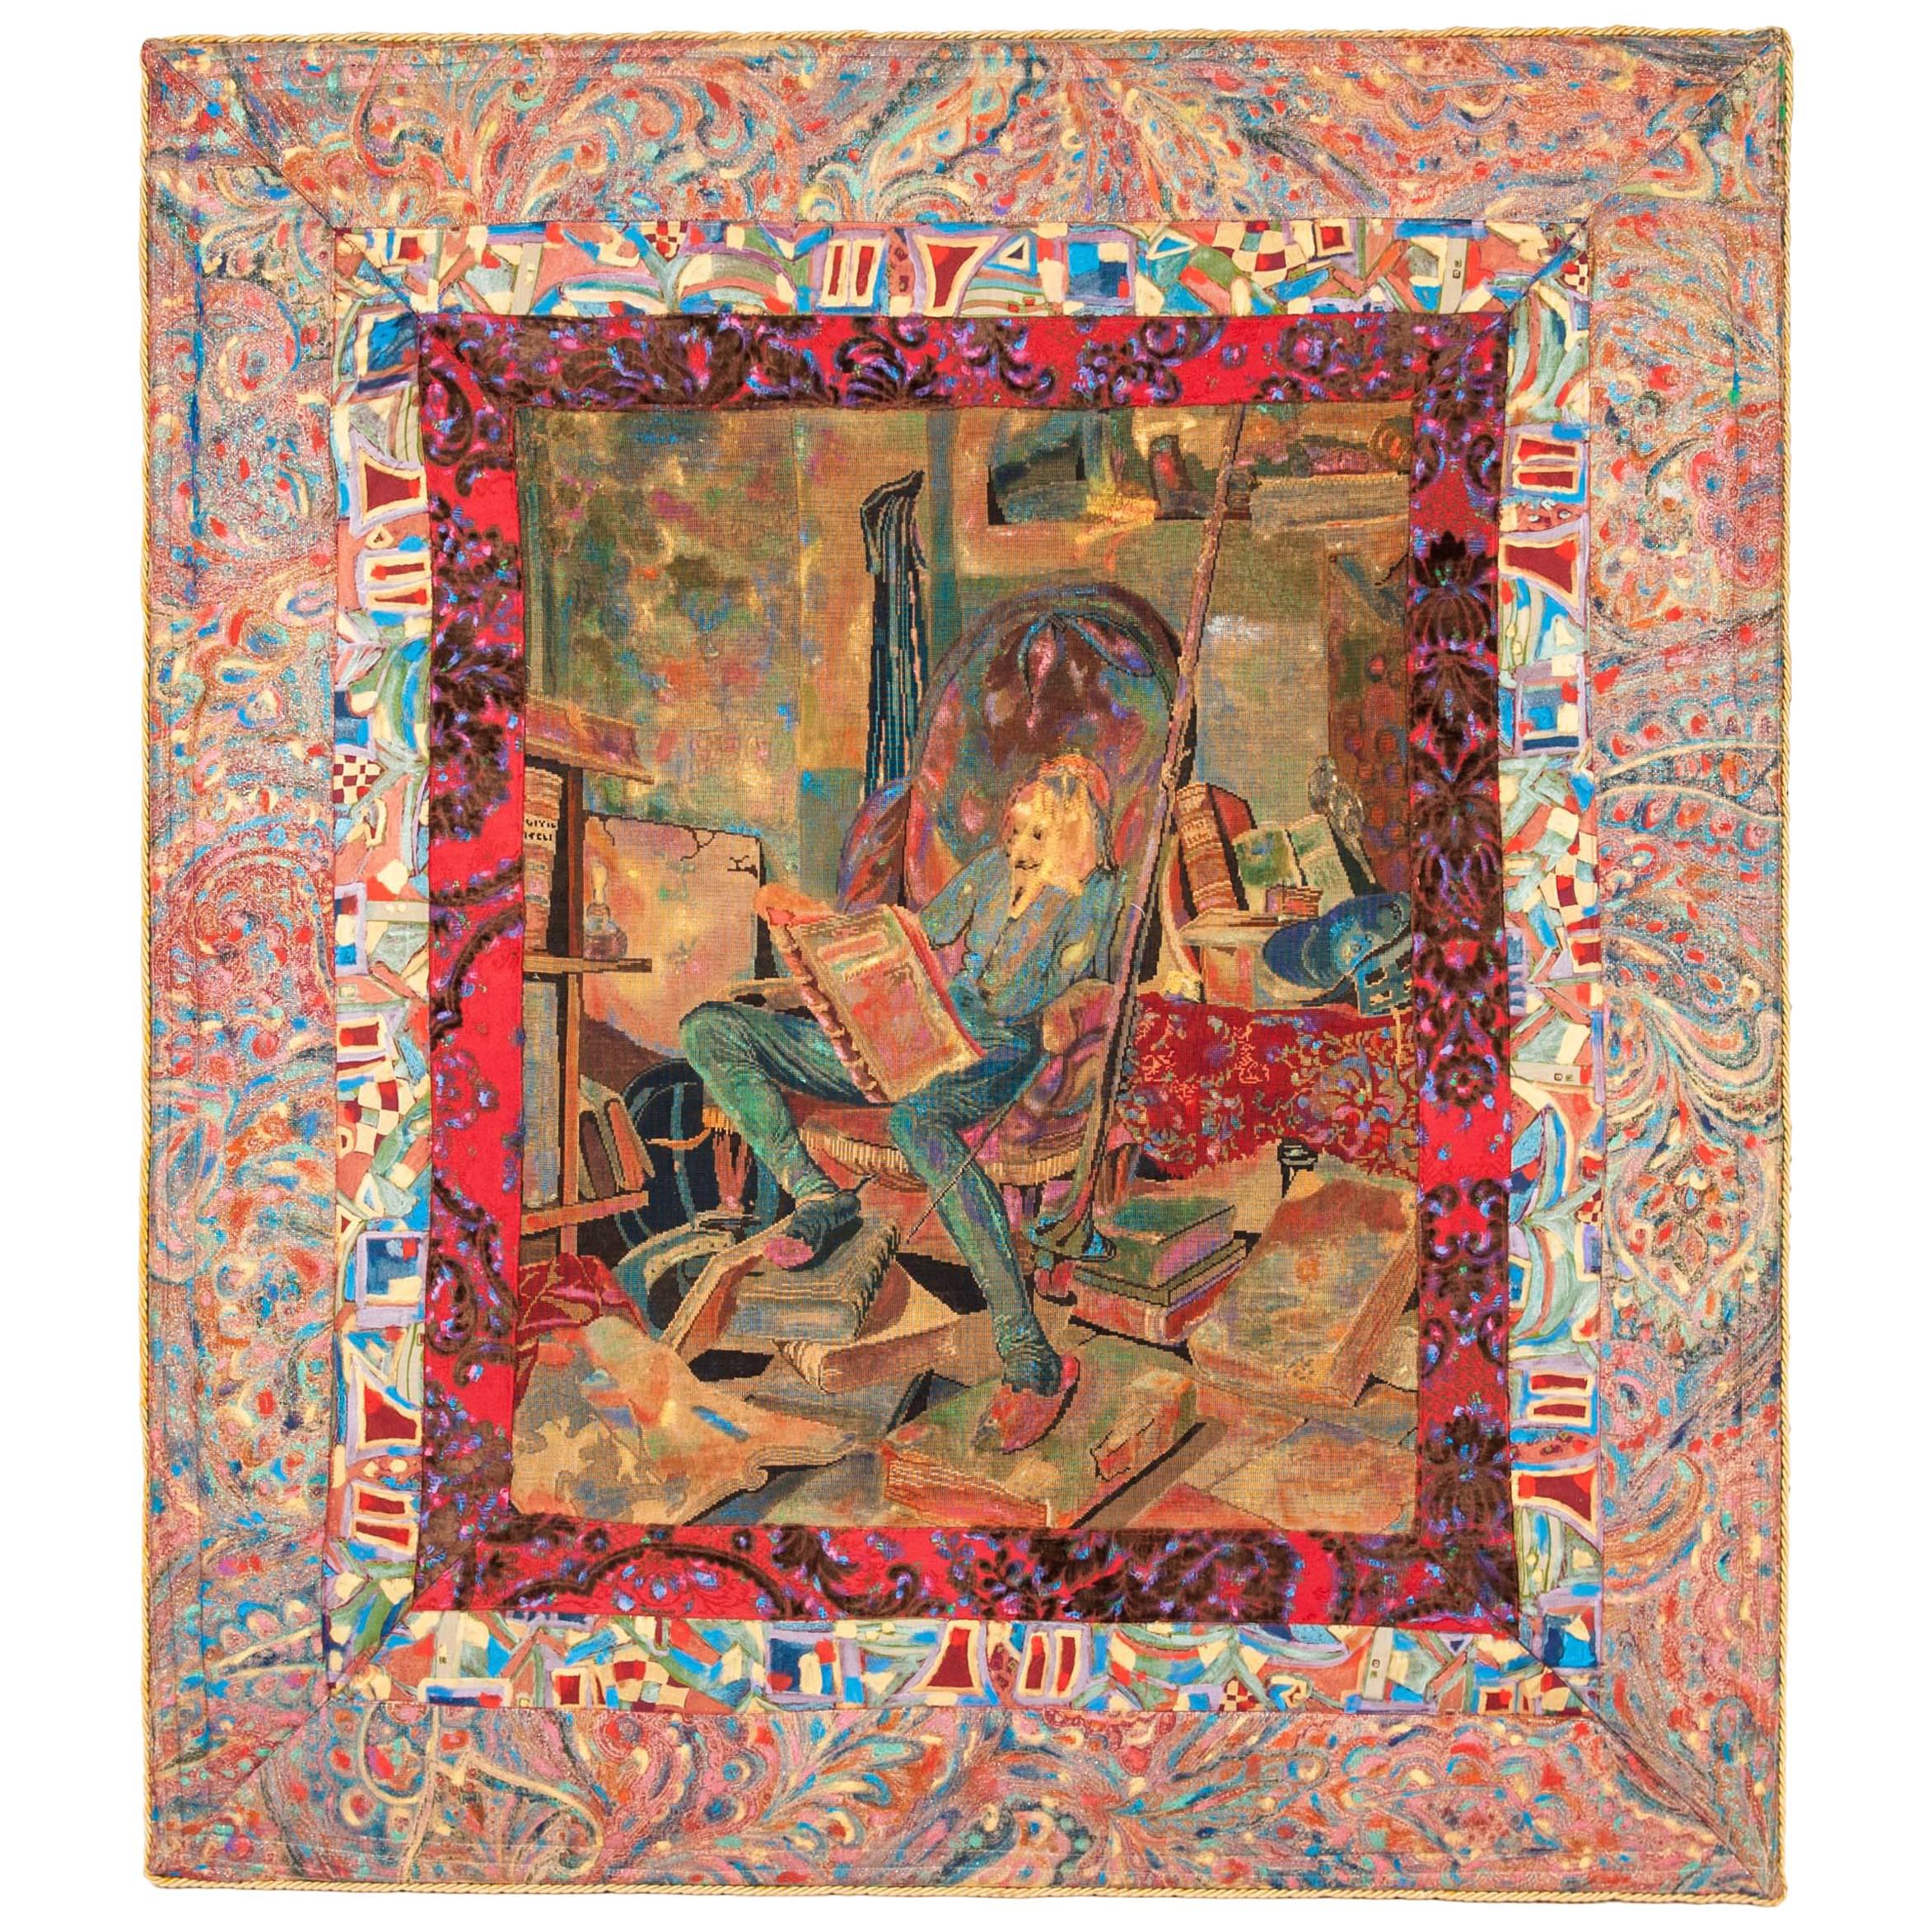 Late 19th Century Wall Hanging Depicting Don Quixote